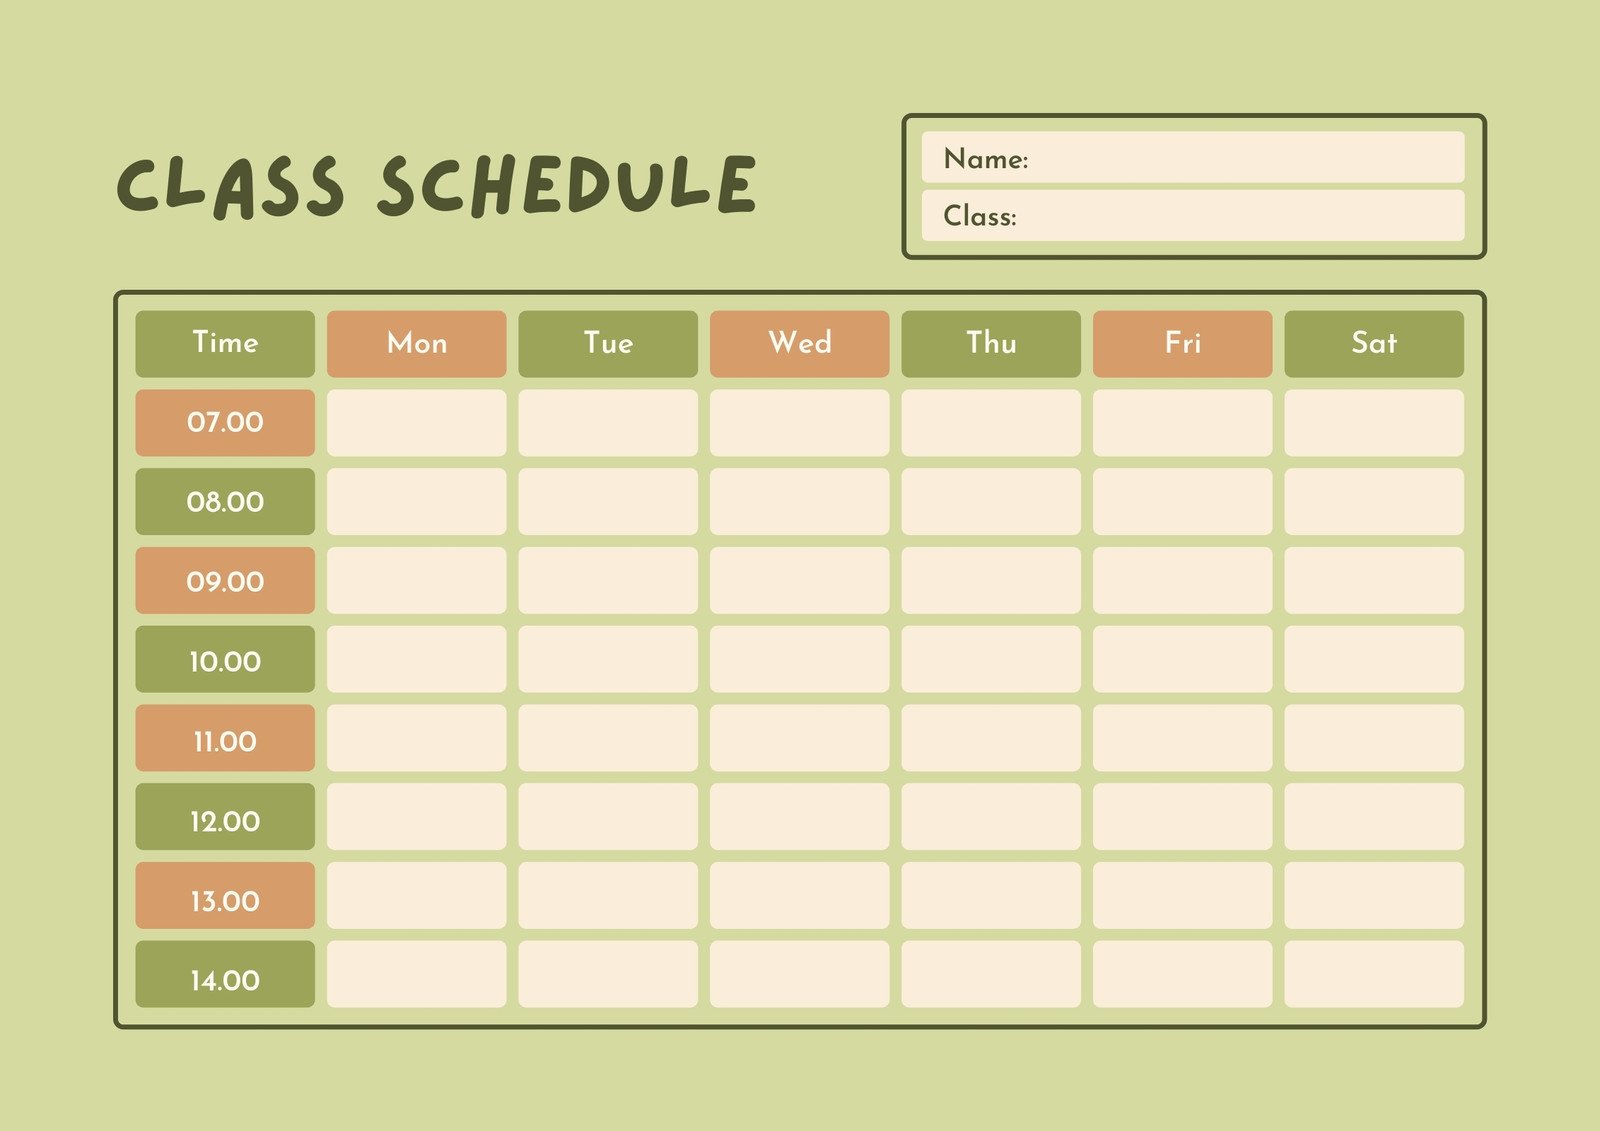 Free Printable Class Schedule Templates To Customize Canva Free Blank Printable Class Schedule